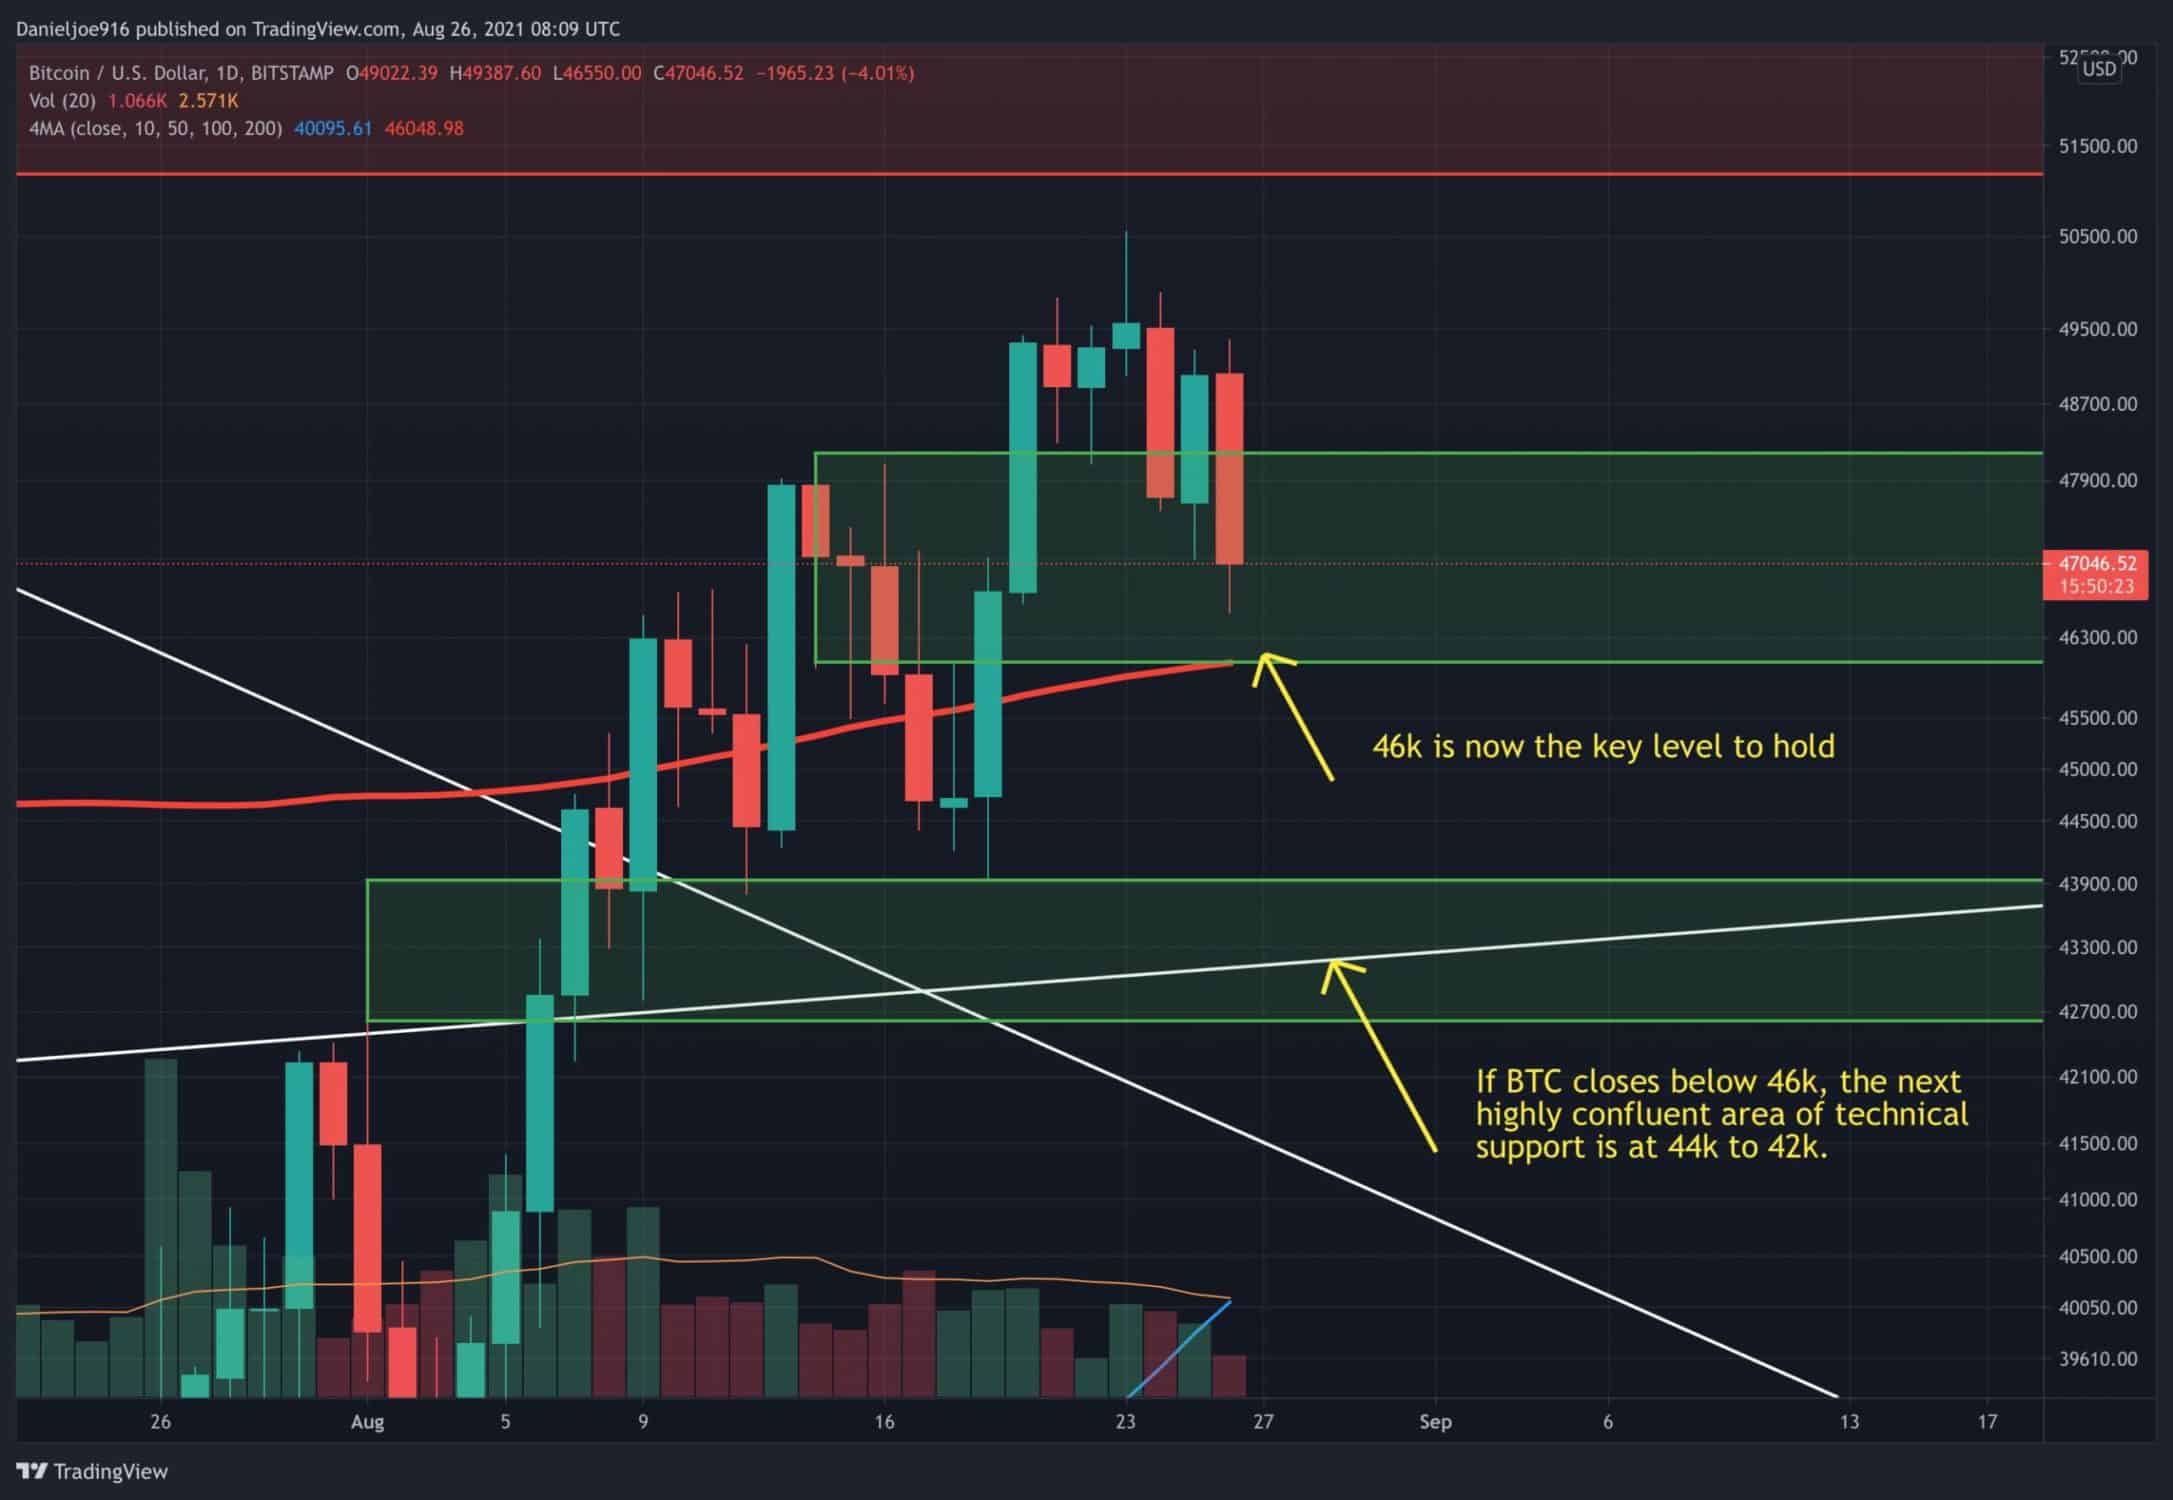 Btc-retraces-as-short-term-selling-pressure-continues:-was-$50k-a-local-top?-(bitcoin-price-analysis)